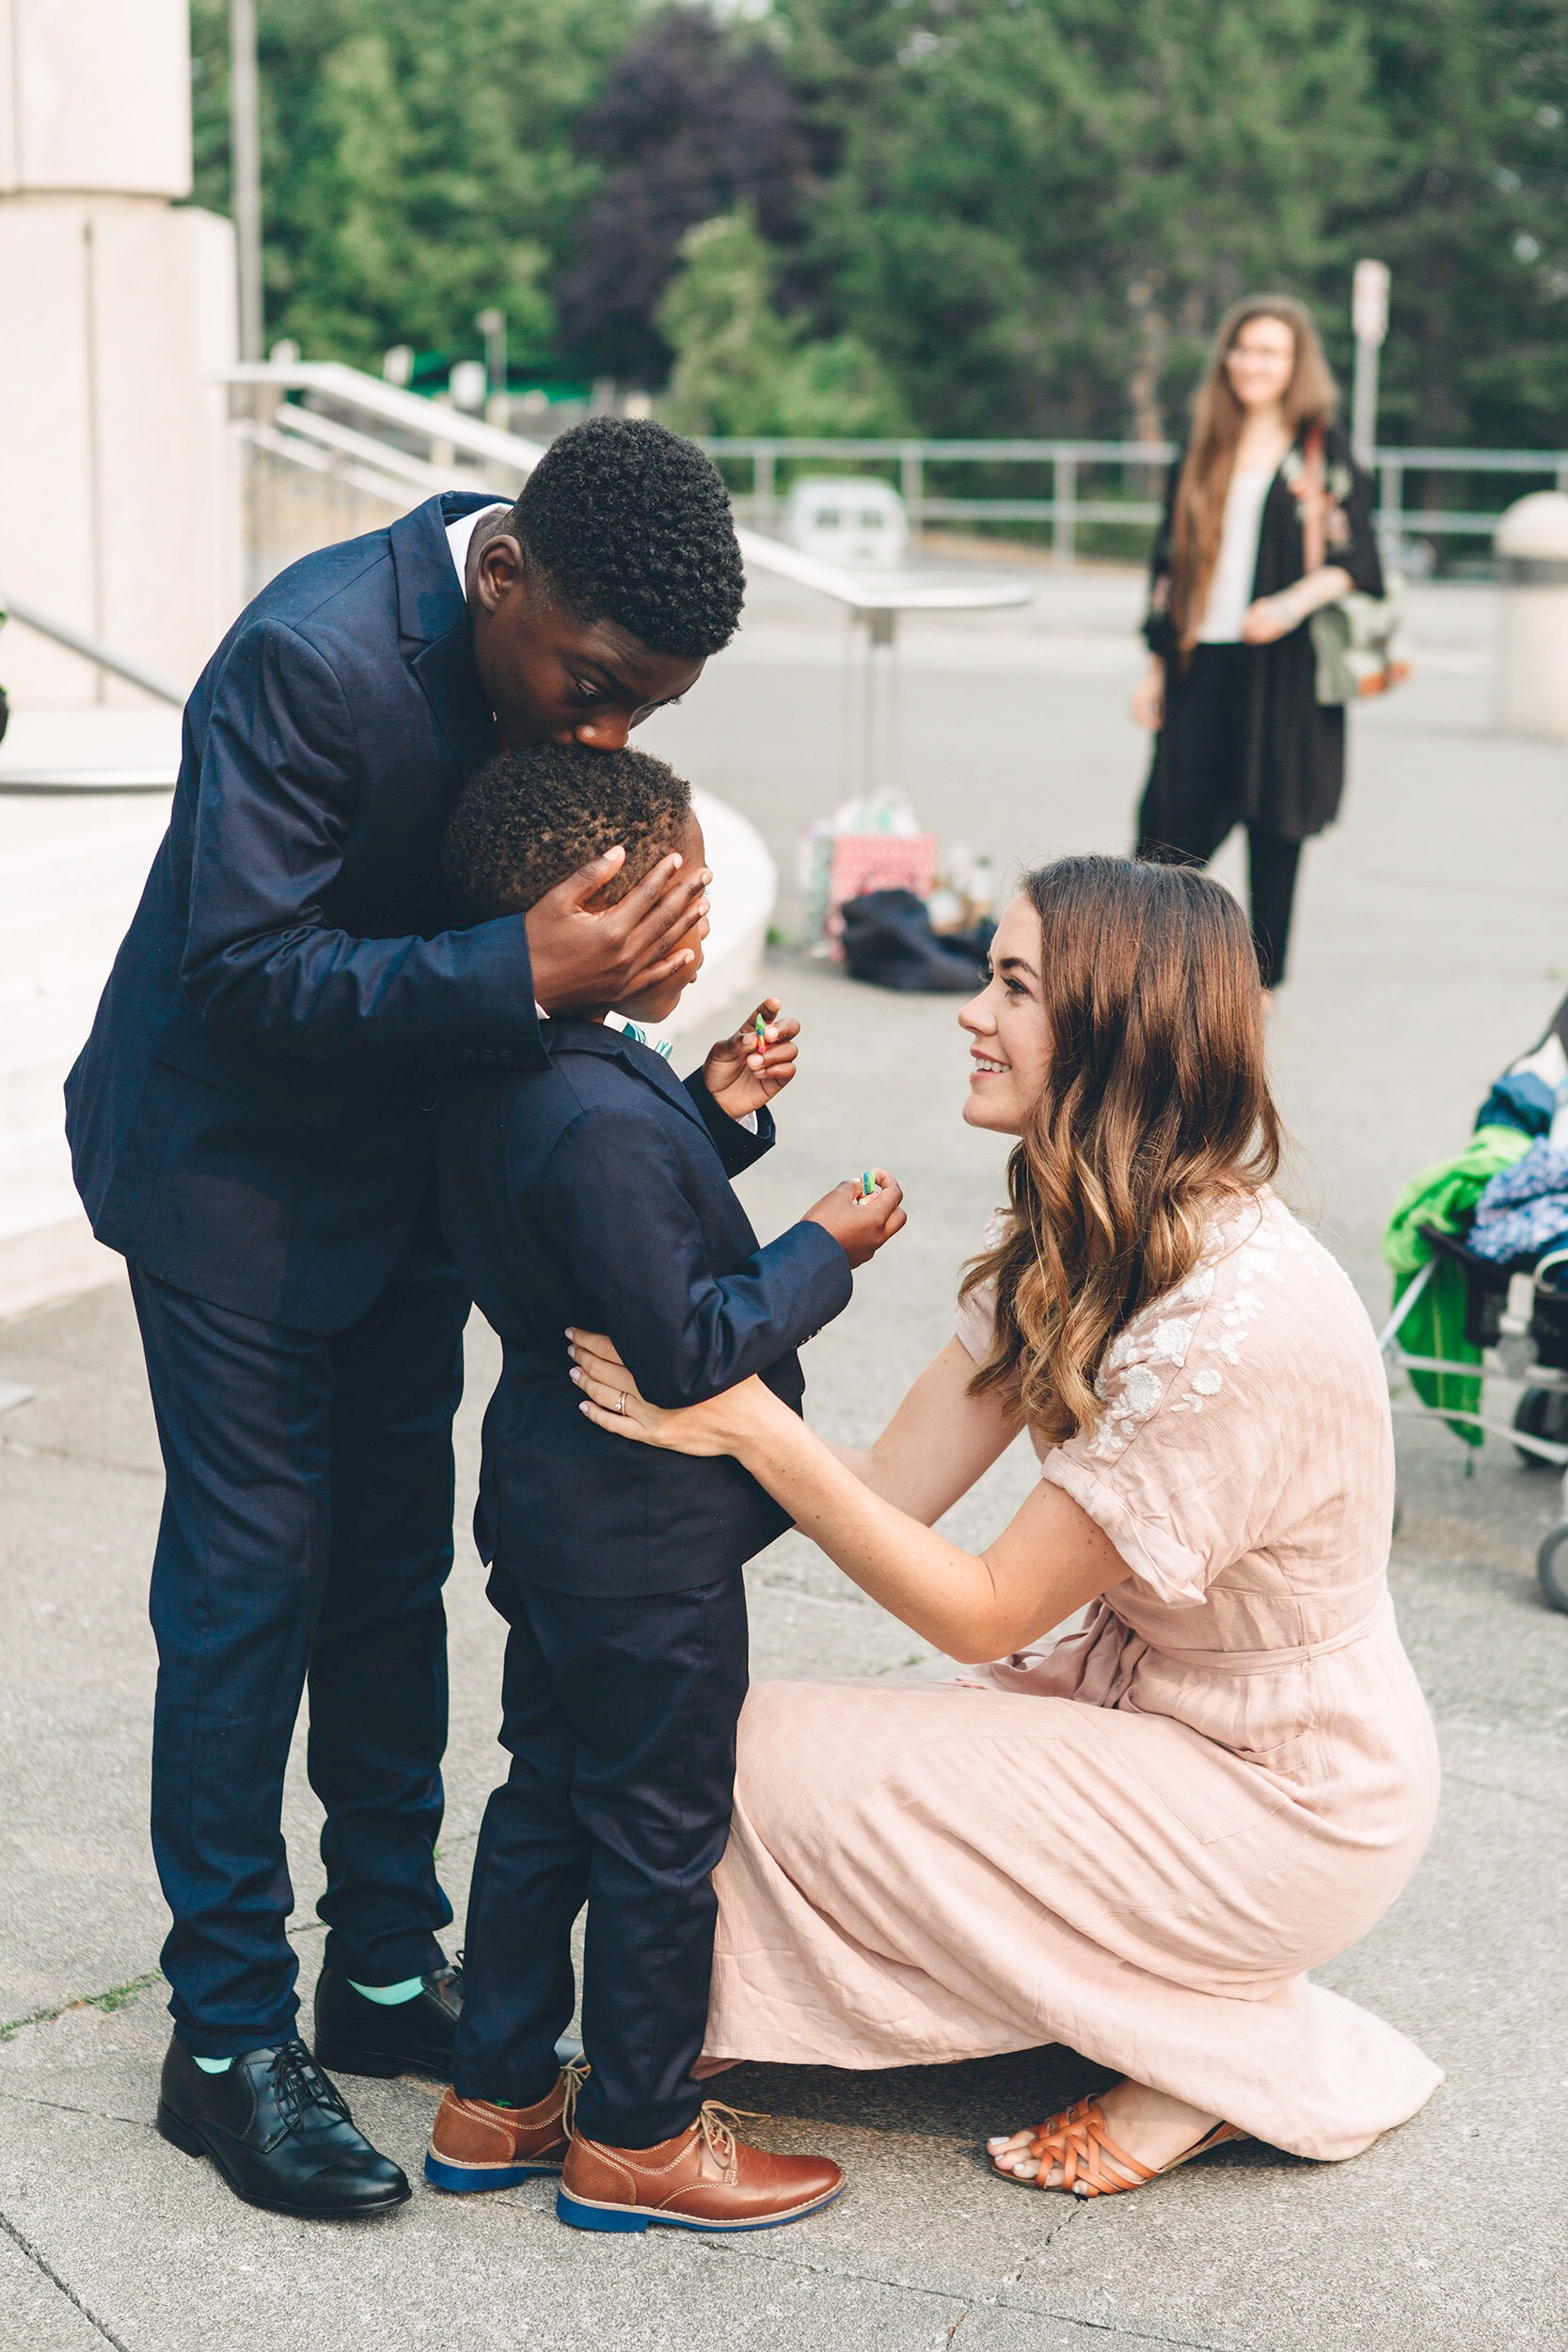 PHOTO: Dayshawn kisses Michael on the head while Sara Cozard looks on in this adoption day photograph, Aug. 13, 2018.